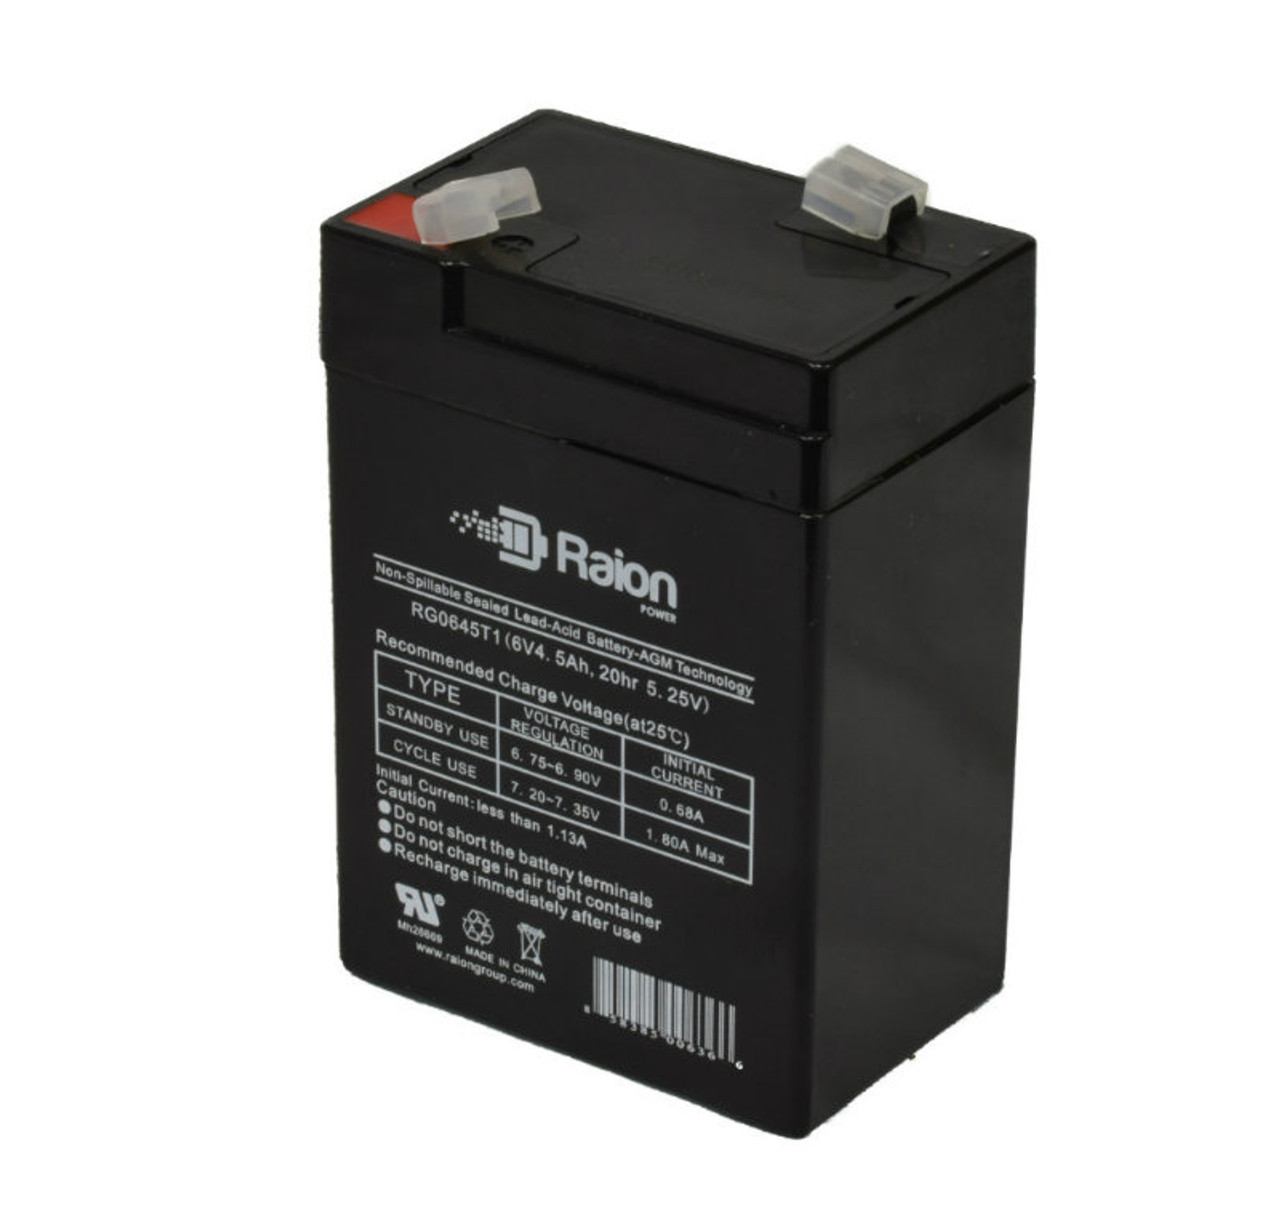 Raion Power RG0645T1 6V 4.5Ah Replacement Ride-On Toy Battery for RiiRoo 12V Police Pursuit Ride On